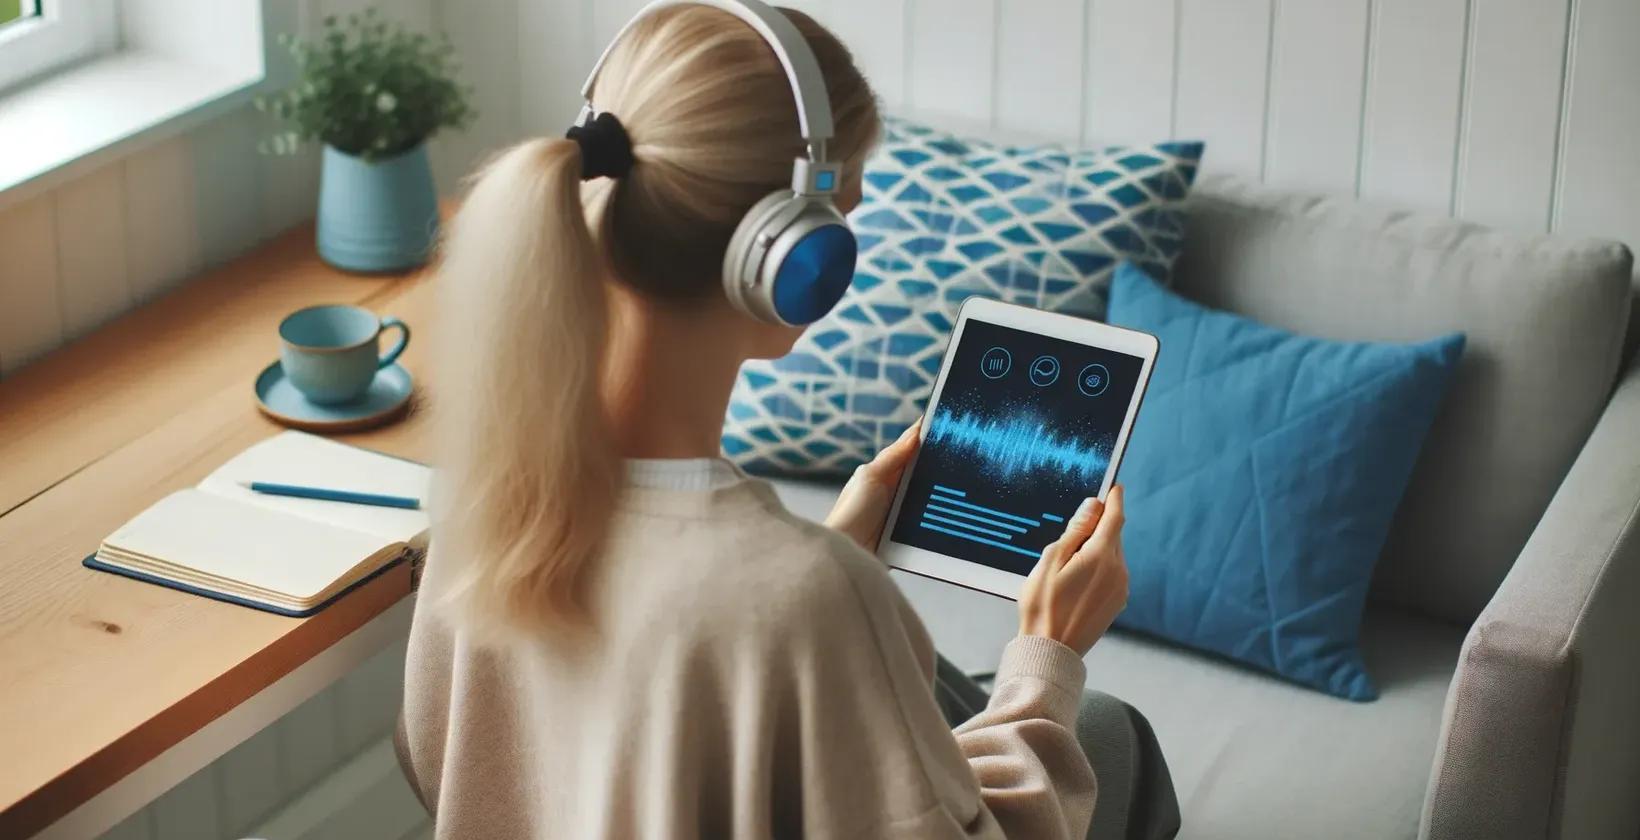 Speech to text conversion hinted by a blonde in headphones by a window, viewing a waveform on her tablet.